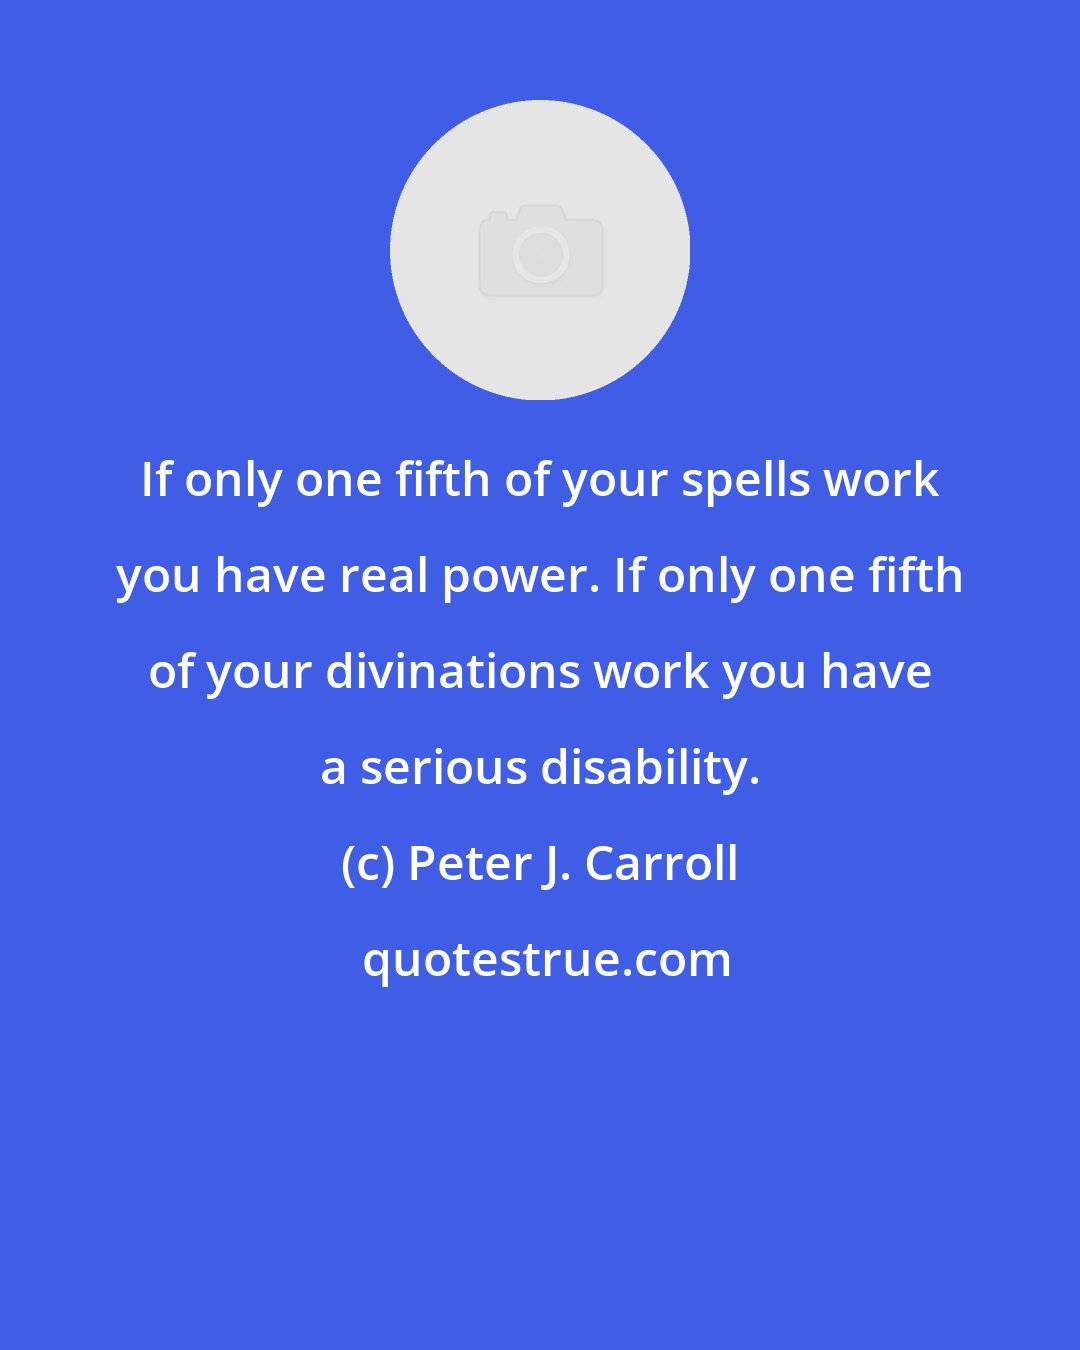 Peter J. Carroll: If only one fifth of your spells work you have real power. If only one fifth of your divinations work you have a serious disability.